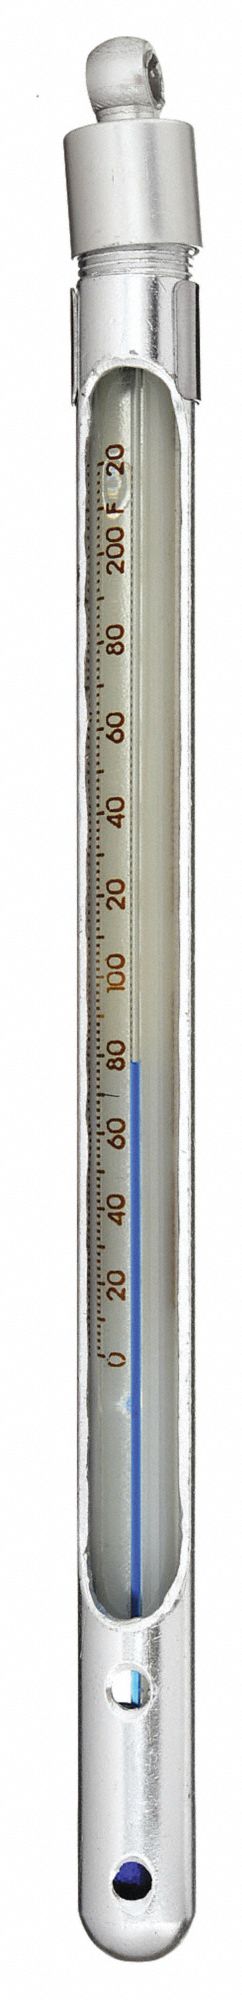 Enviro-Safe Pocket Glass Thermometer 0 to 220F